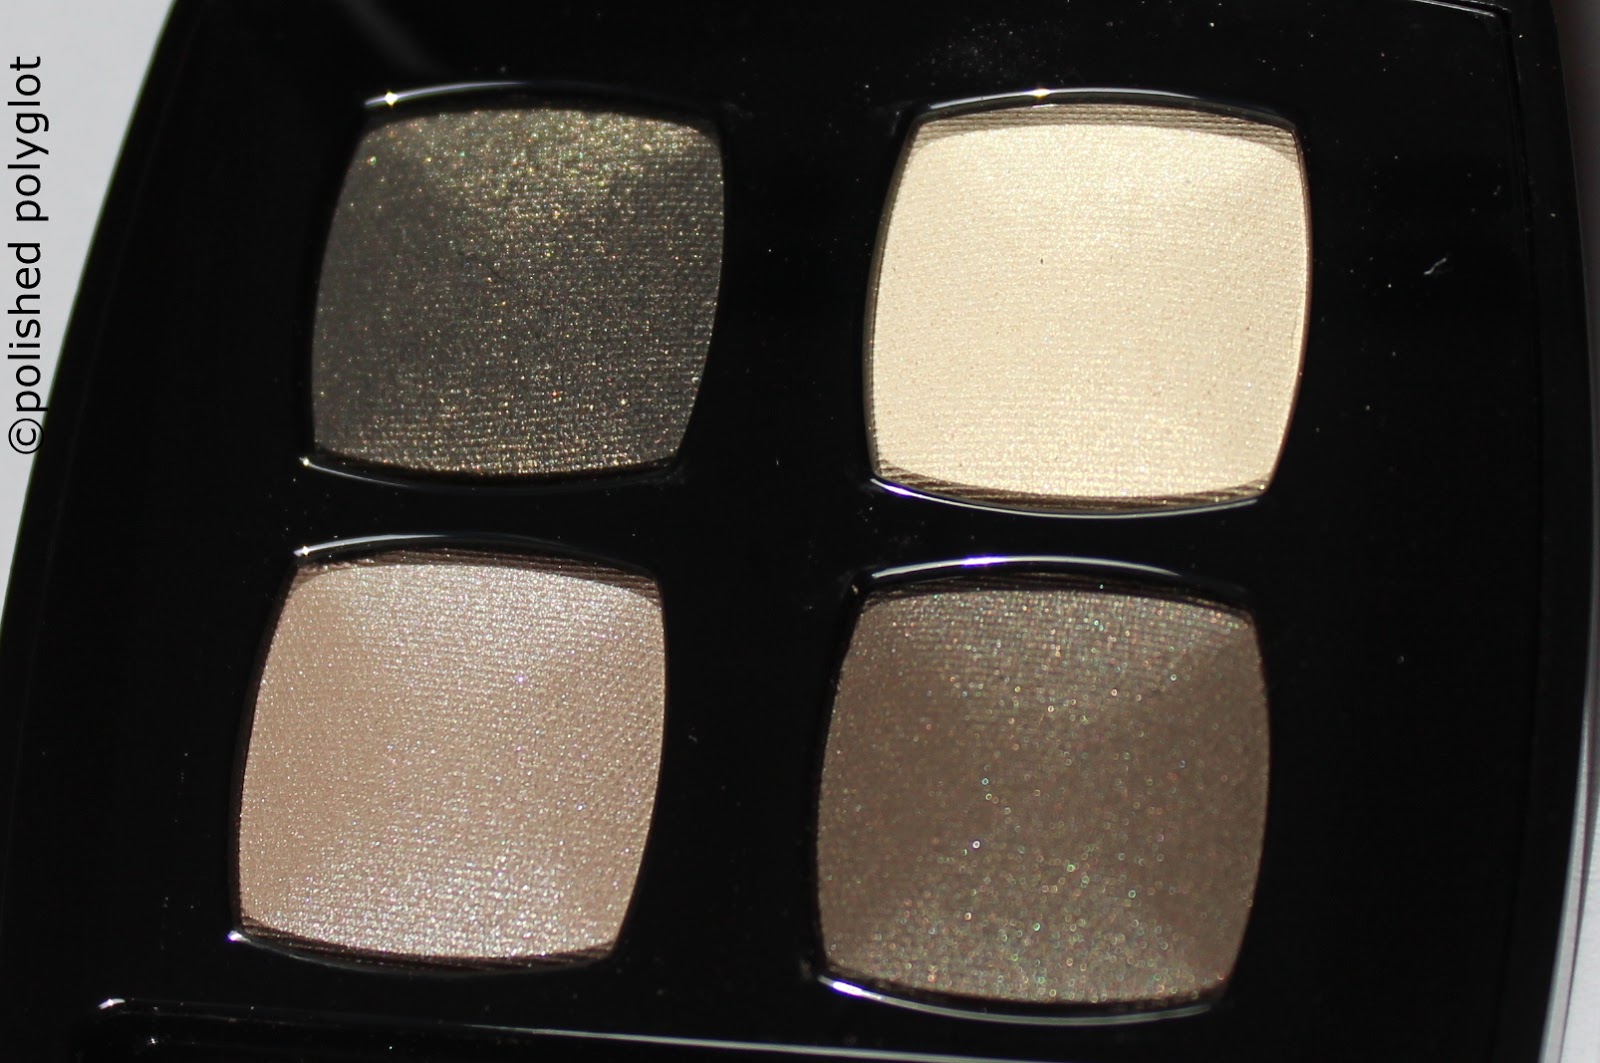 Fall Favourites: Chanel Les 4 ombres #43 Mystère & EOTD / Polished Polyglot